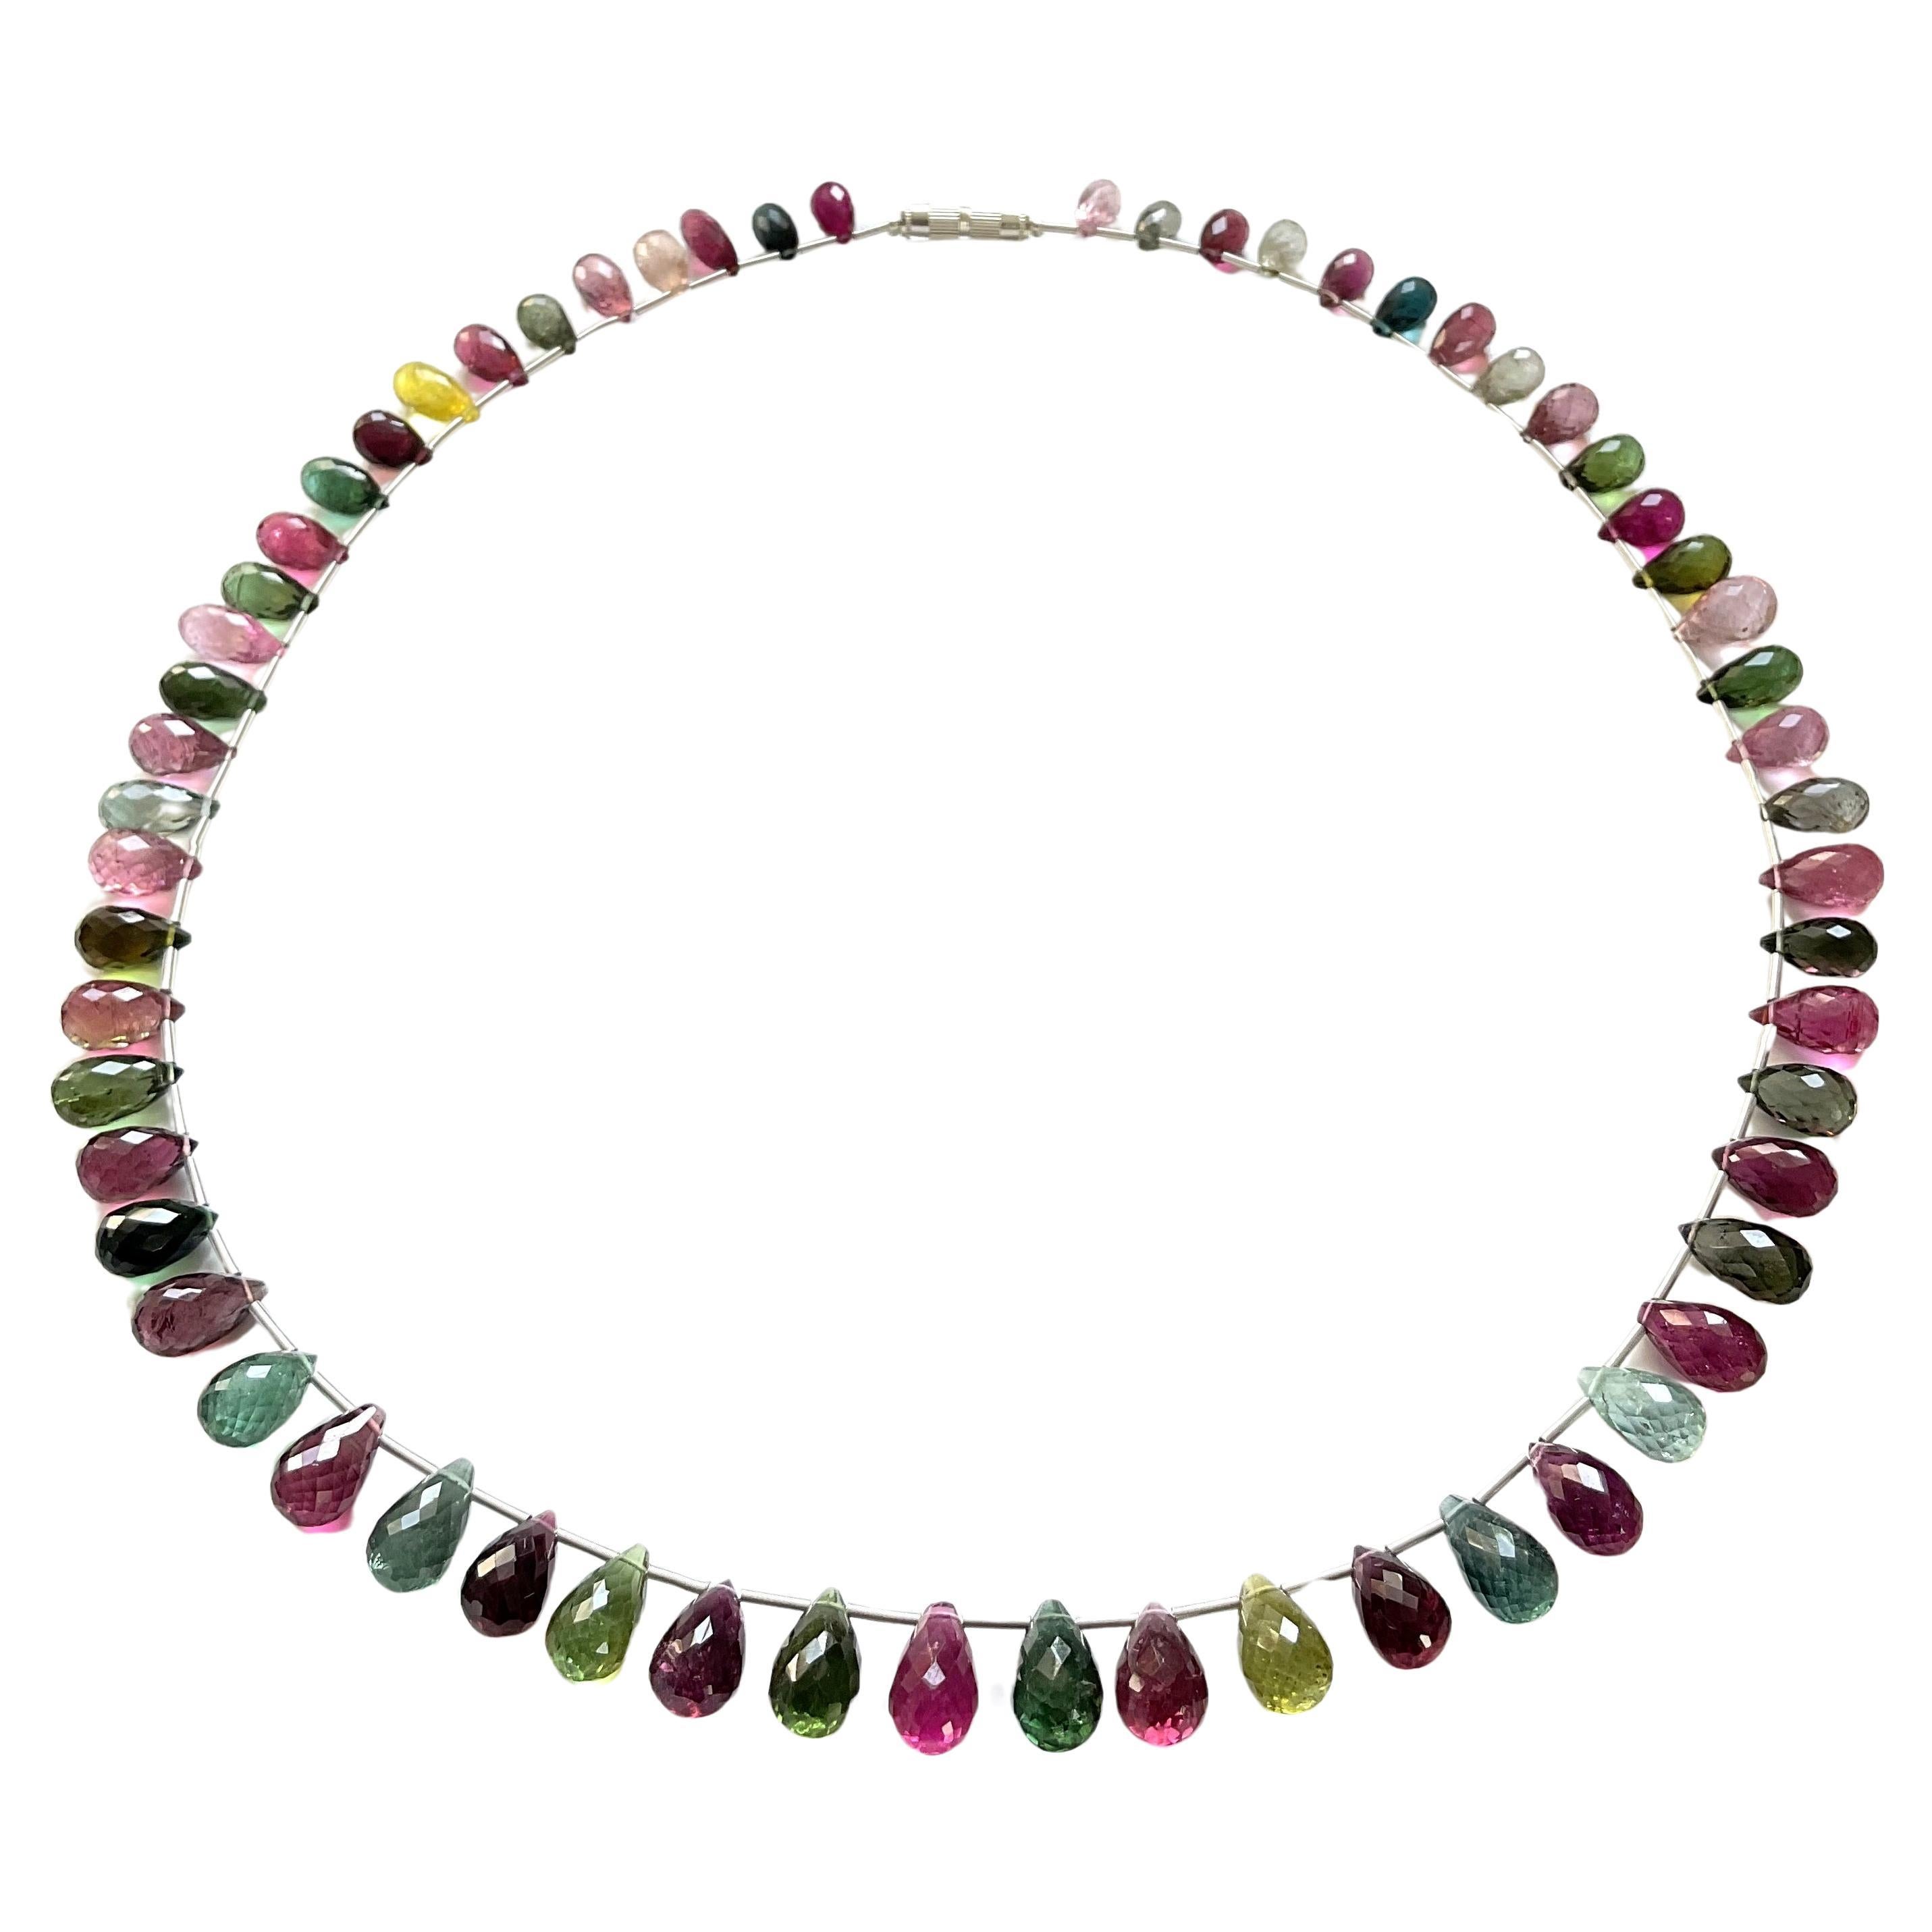 Multi Color 178.85 Carats Tourmaline Top Quality Natural Faceted Drops Necklace

Weight: 178.85 Carats
Size: 5x10 To 6x10 MM
Shape: Faceted Drops
Quantity: 1 Strand
